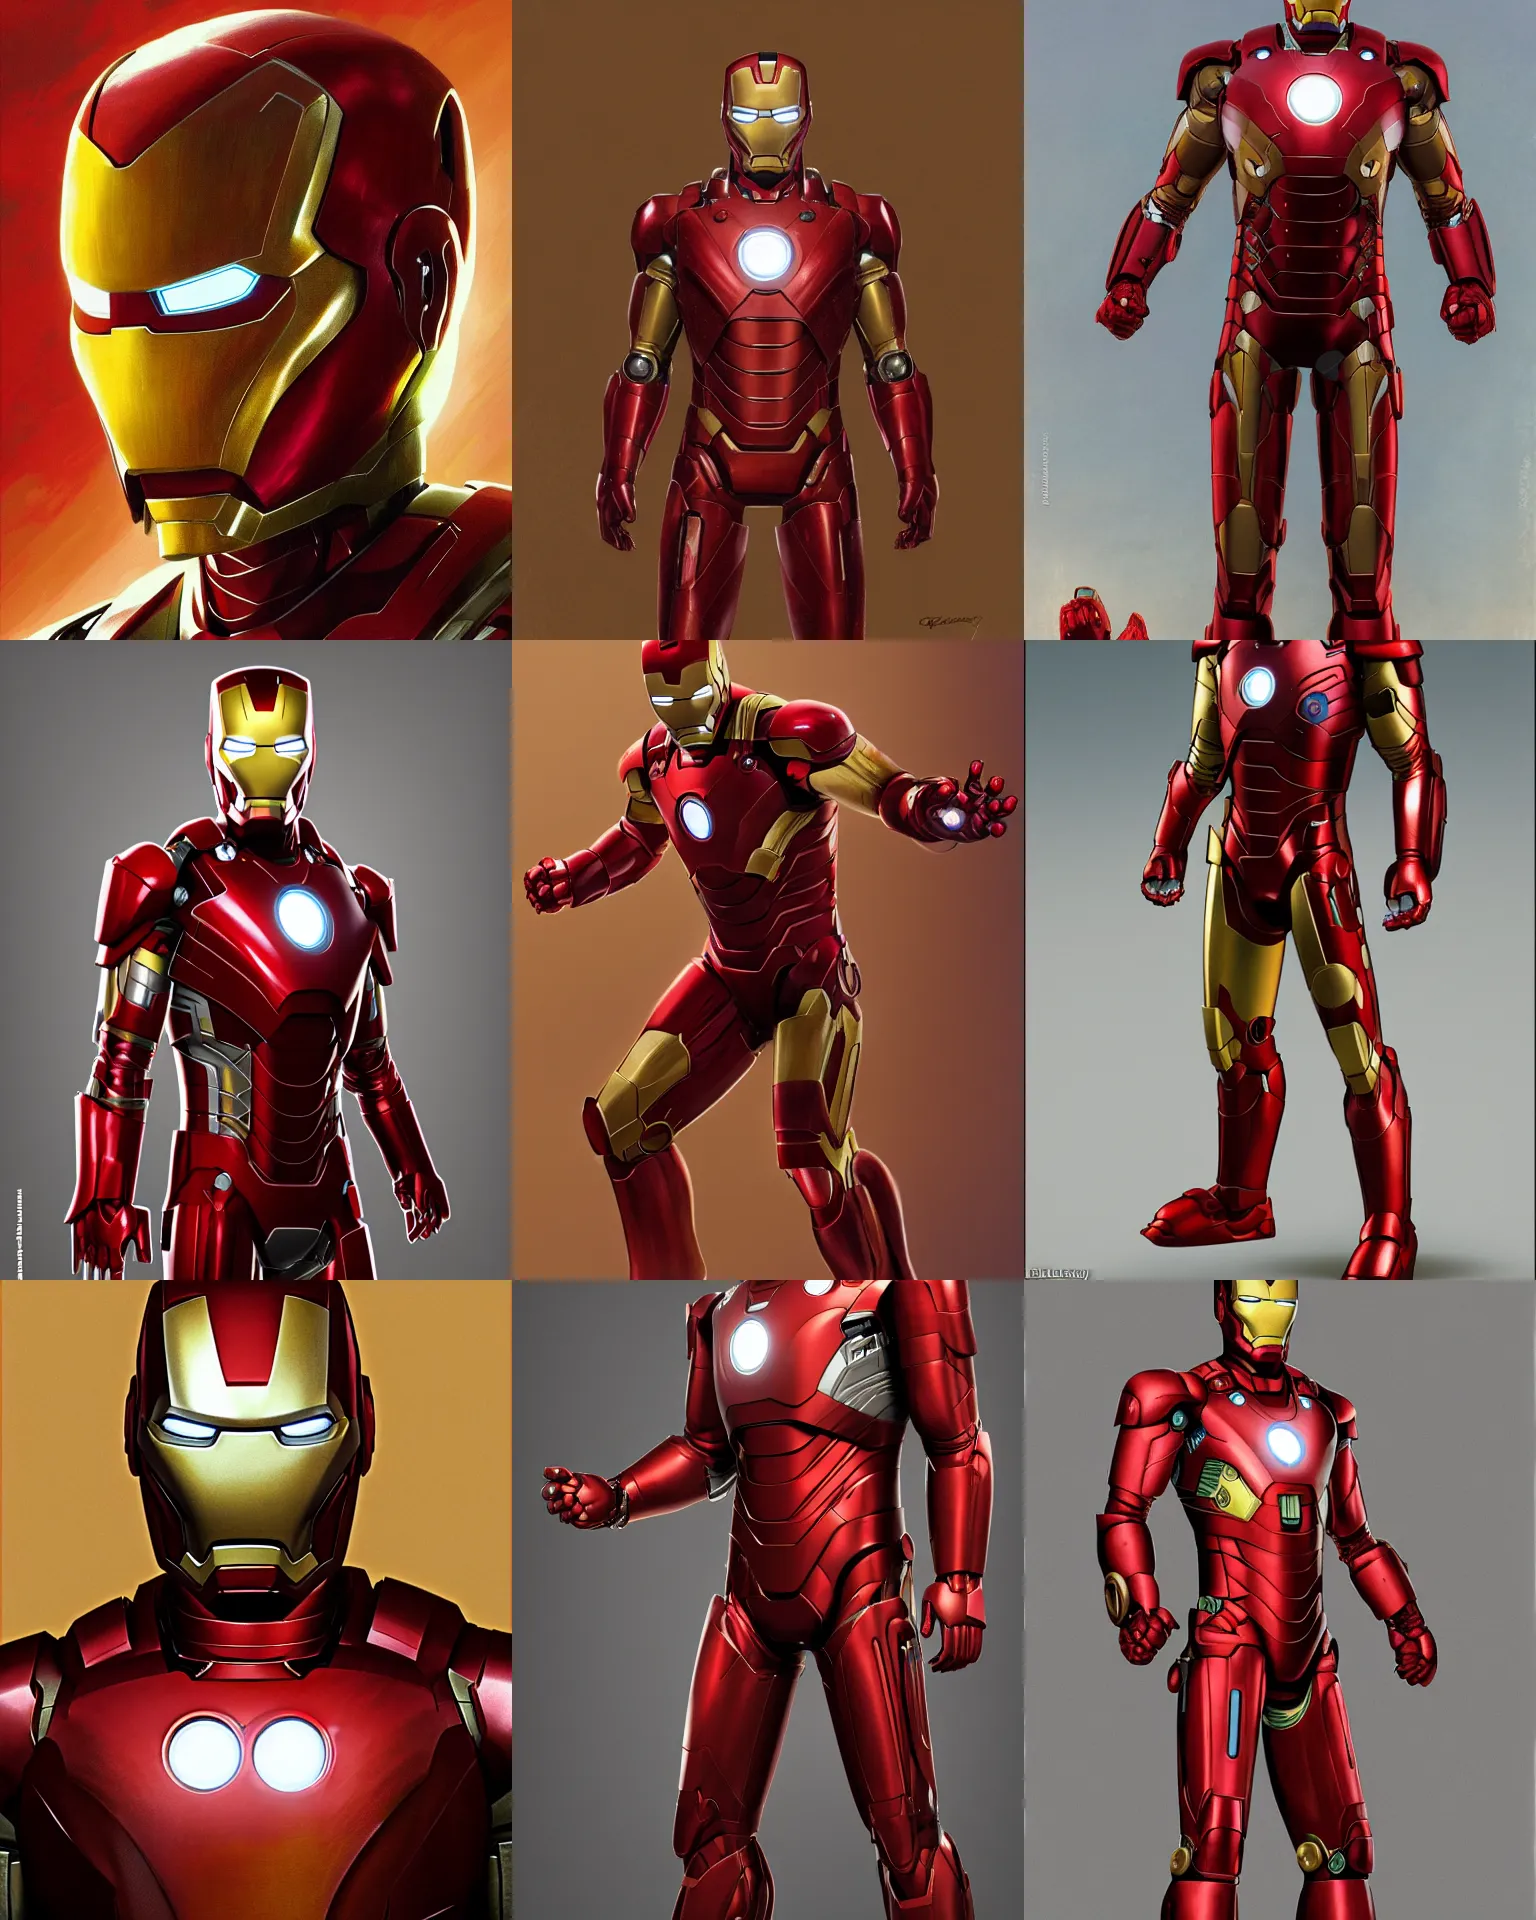 How close are we to a real Iron Man suit? - Quora